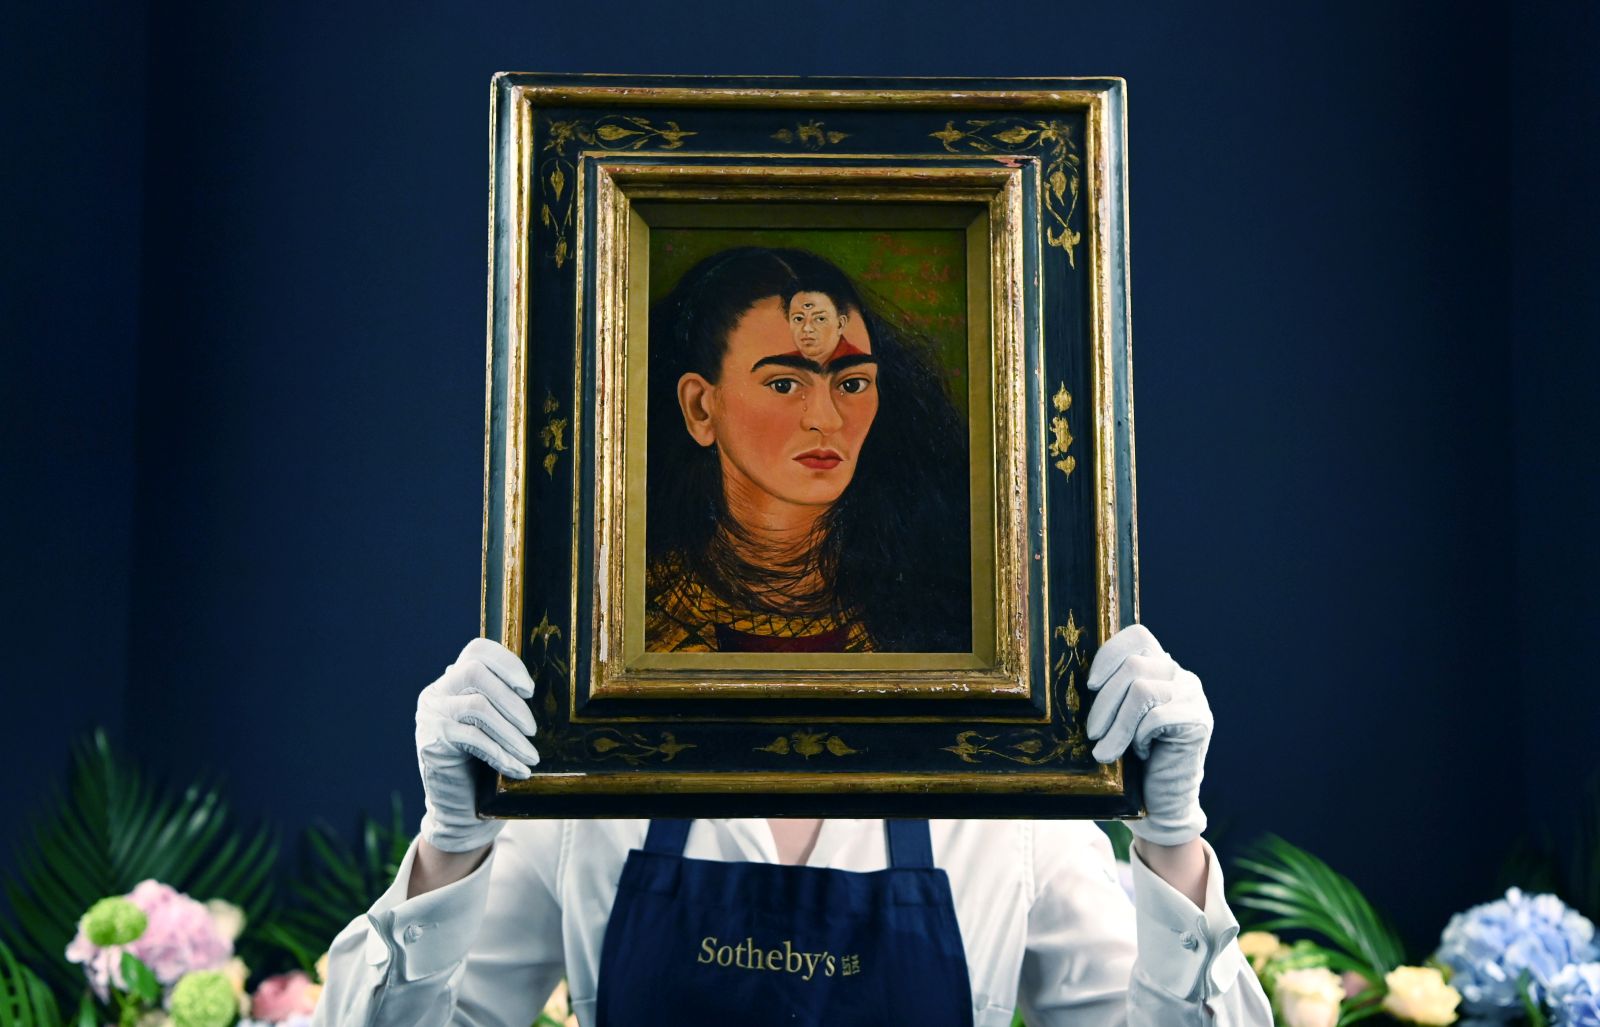 epa09535655 A Sotheby's auction house staff with Mexican artist Frida Kahlo's final 'bust' self-portrait, titled 'Diego y yo' (Diego and I), at Sotheby's in London, Britain, 21 October, 2021. Thought to be the most valuable work by the Mexican artist, the painting is estimated to fetch in excess of some USD 30 million and will go on sale in New York in November.  EPA/ANDY RAIN